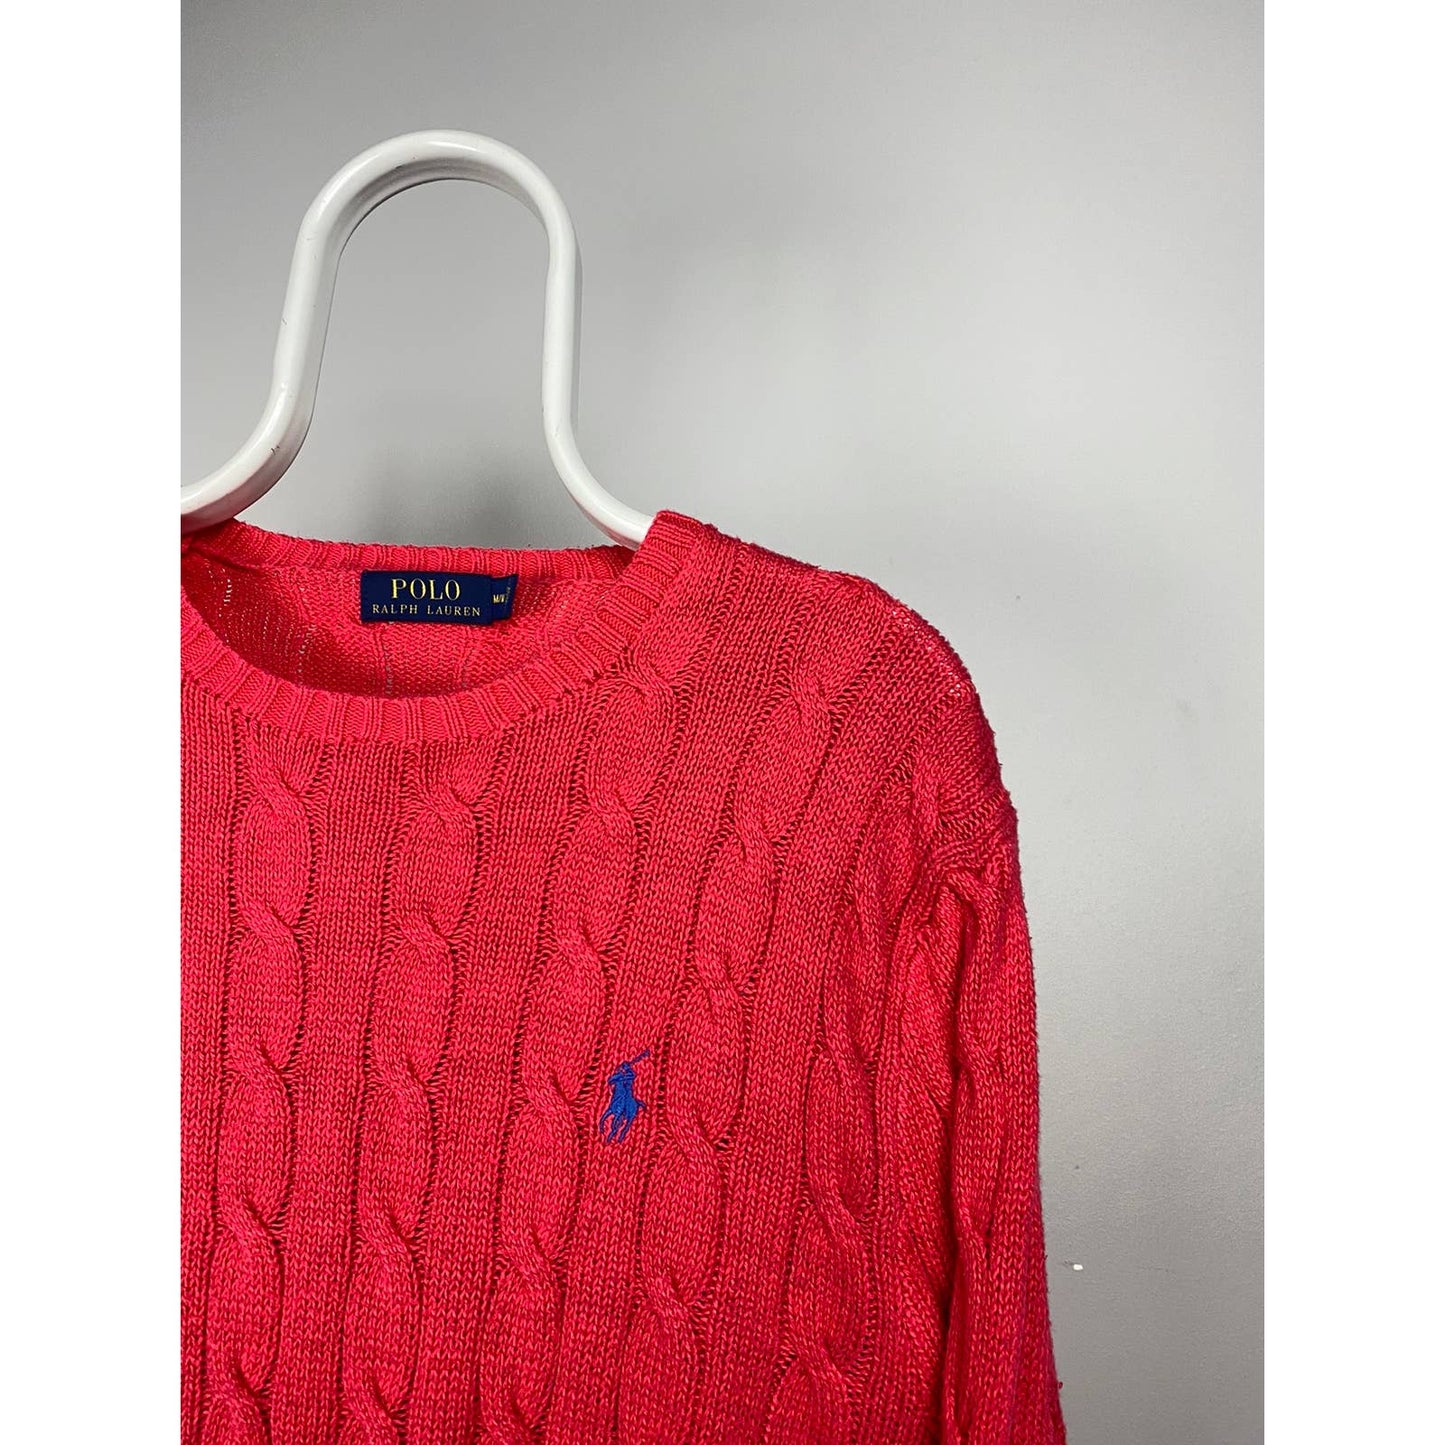 Polo Ralph Lauren Pink cable knit sweater